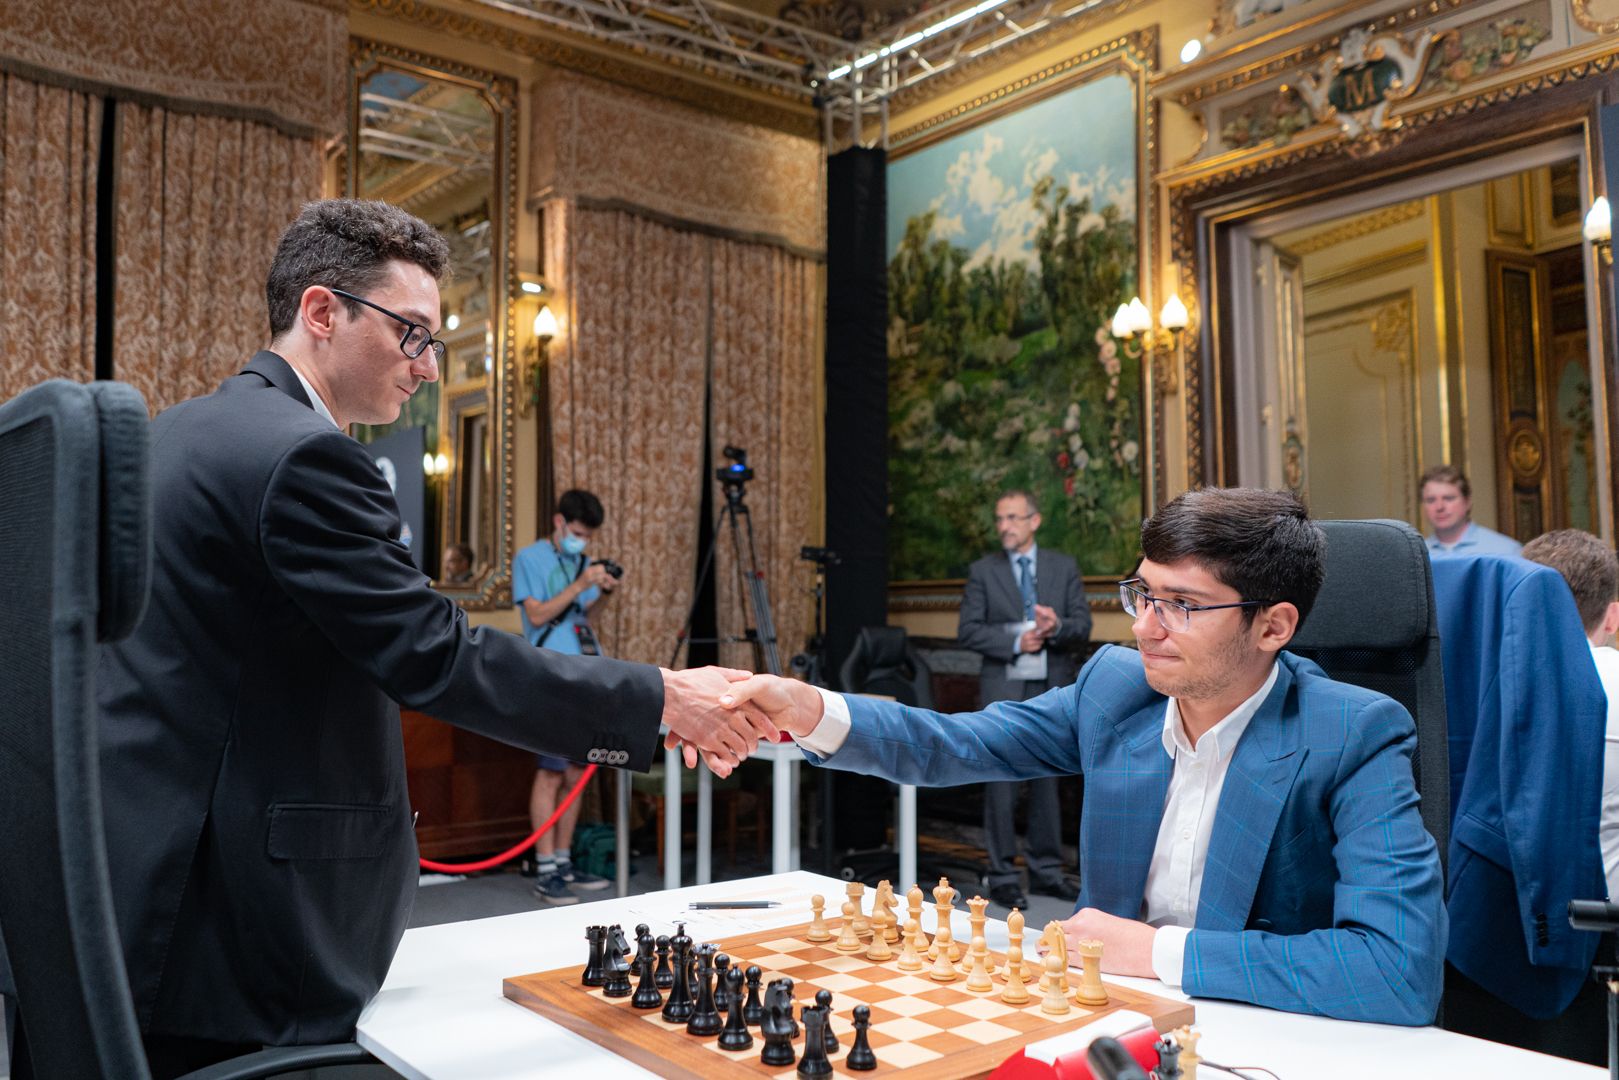 The top seeds live up to expectations at the 27th annual Bradley Chess Open  – Chessdom